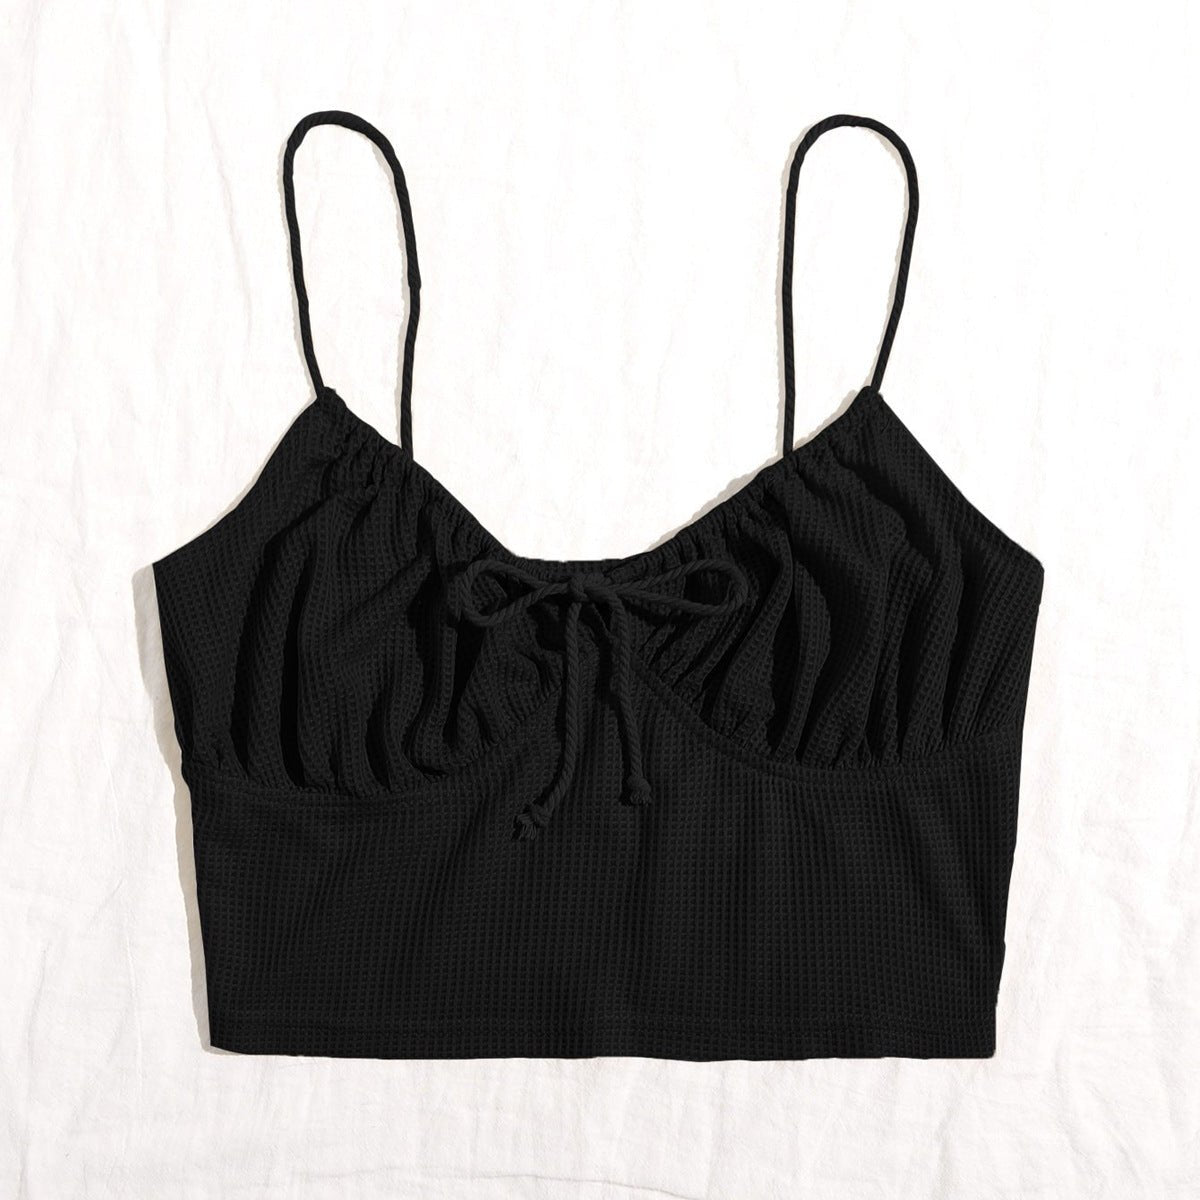 Camisole With Front Straps And Chest Folds - Camisoles -  Trend Goods